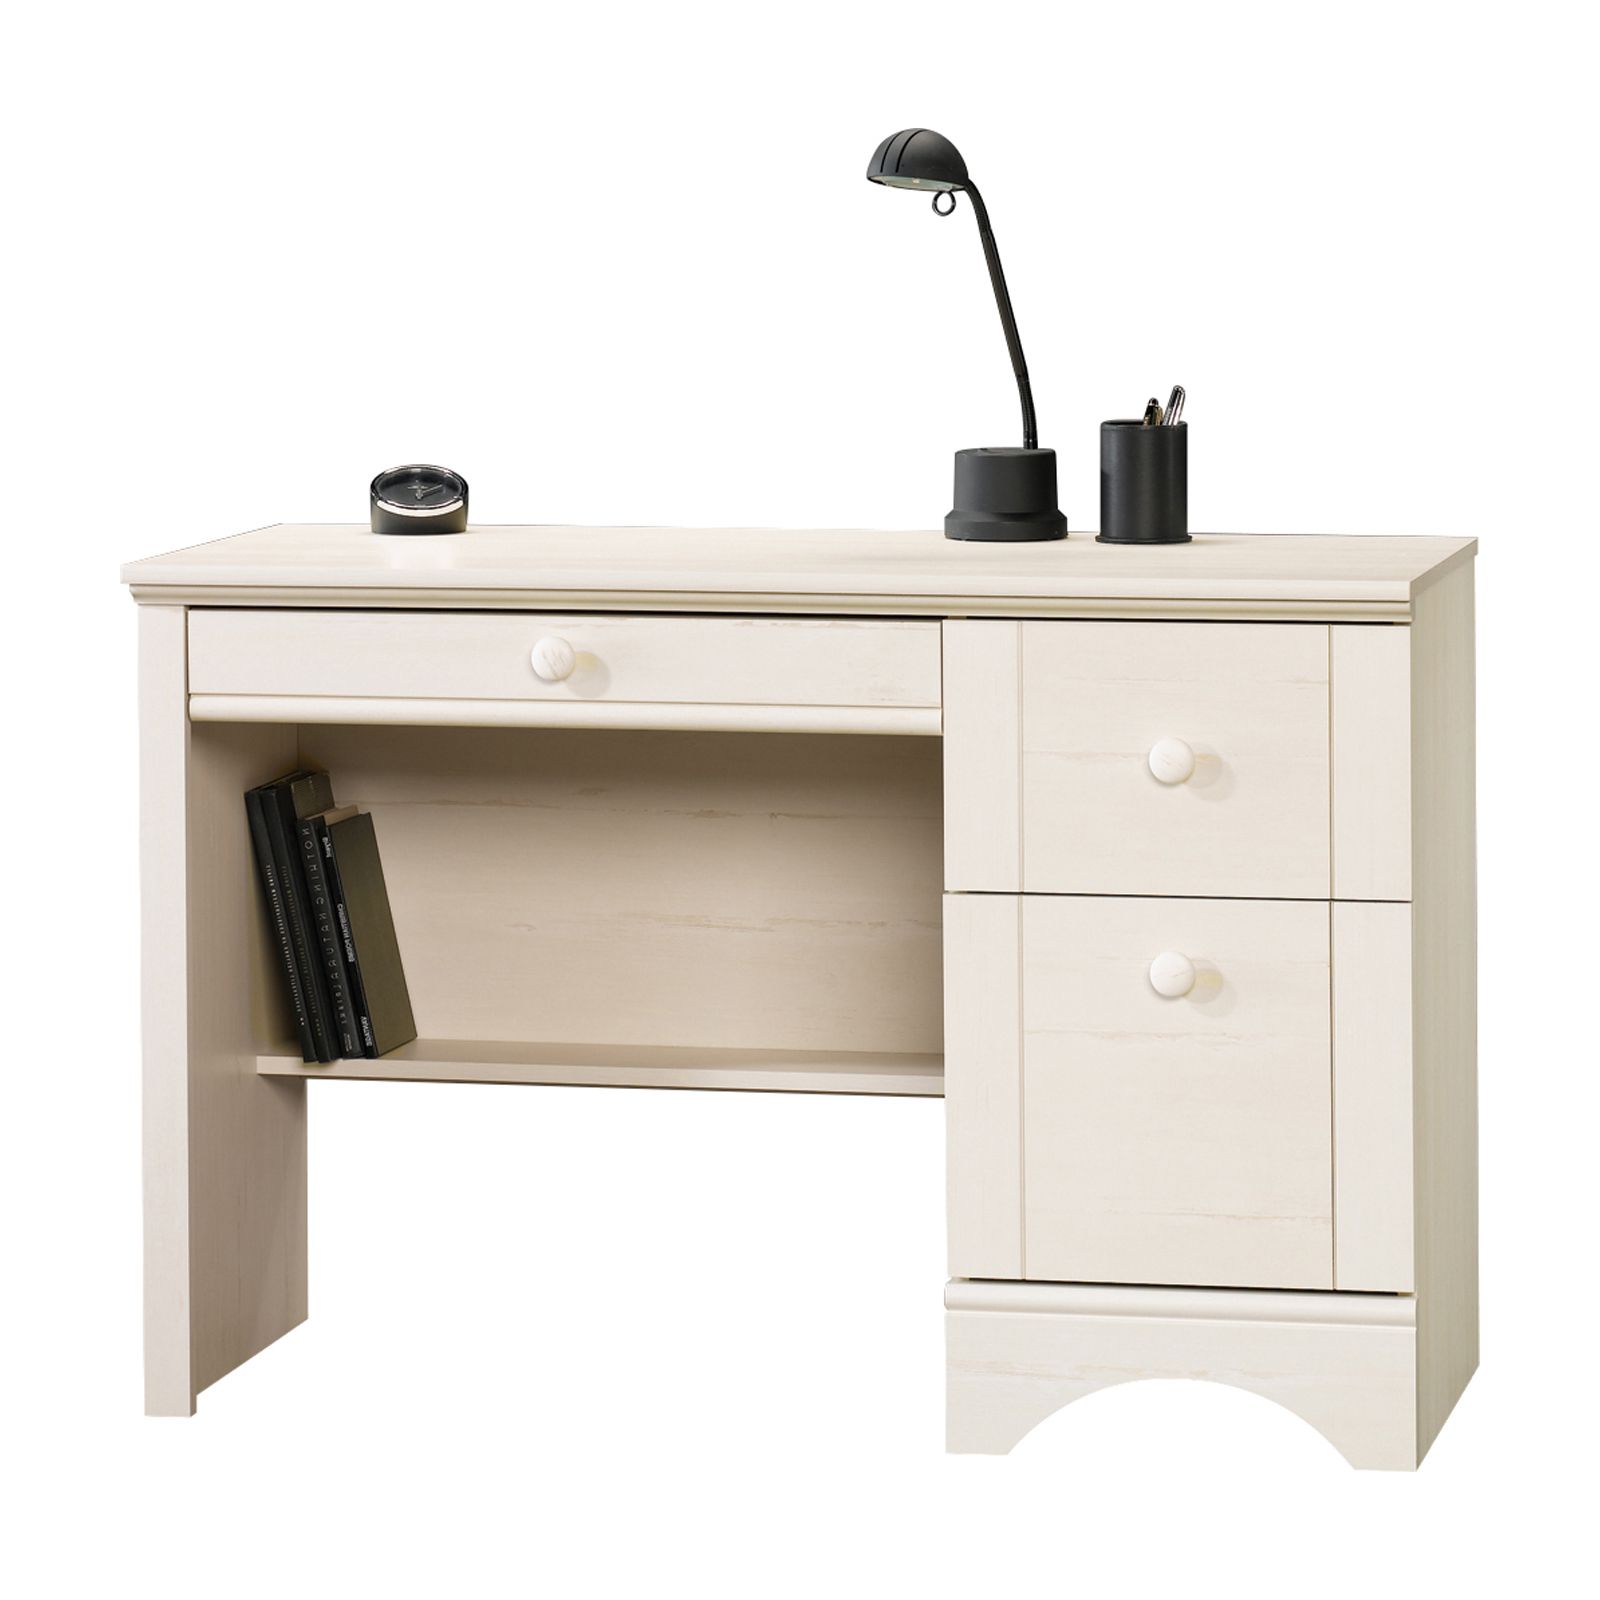 Recent Sauder Harbor View Computer Desk – Antiqued White – Desks At Hayneedle Intended For Off White And Cinnamon Office Desks (View 7 of 15)